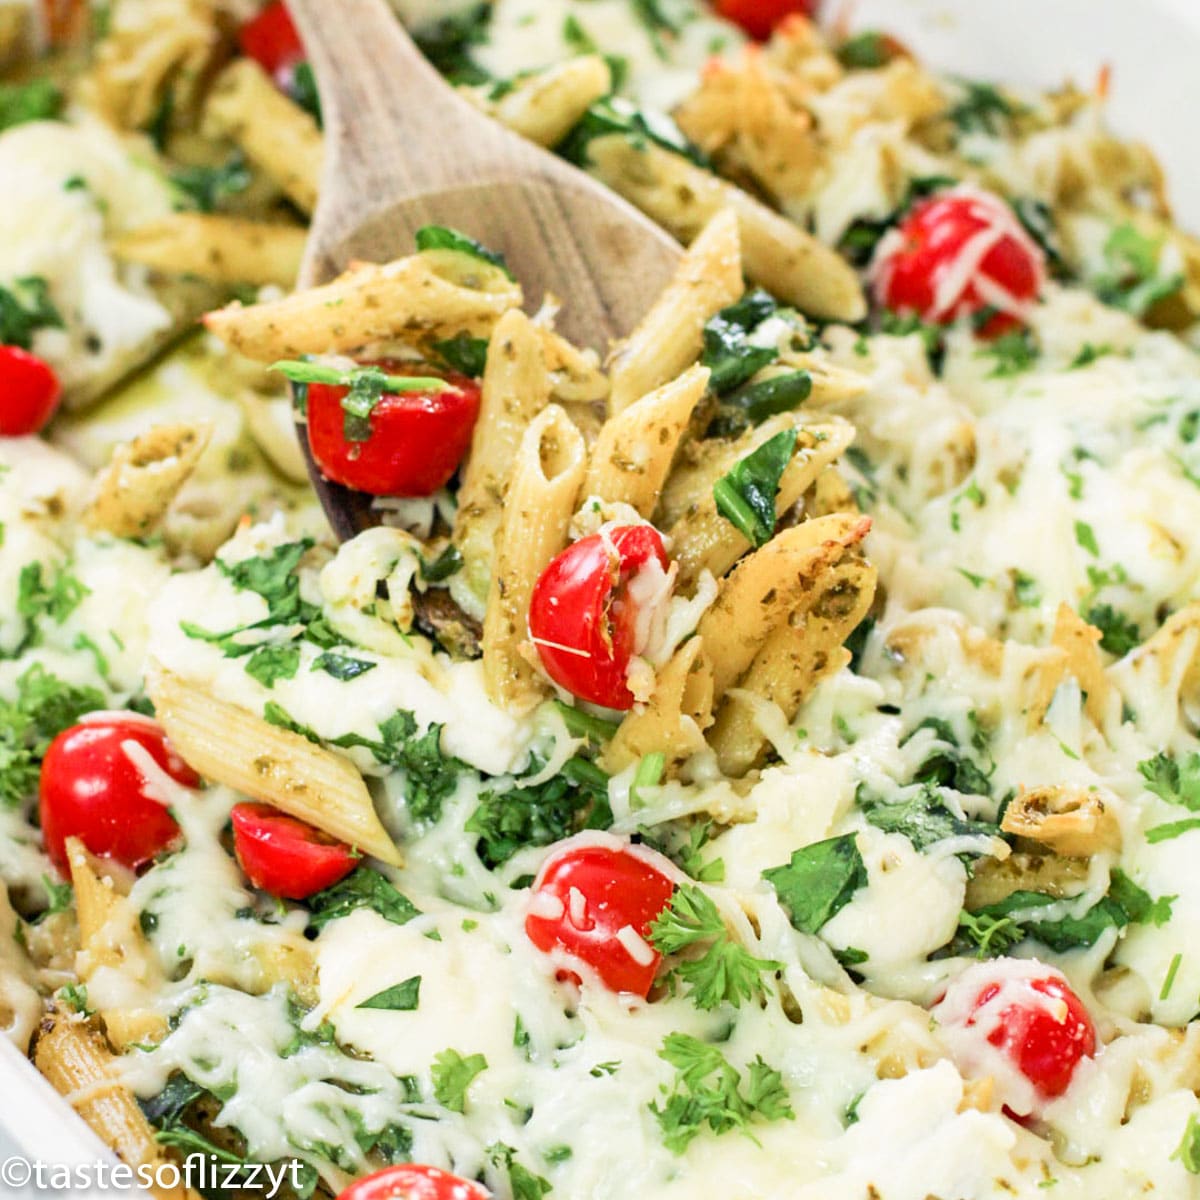 Pesto Pasta Bake Recipe {with Cheese and Fresh Spinach}